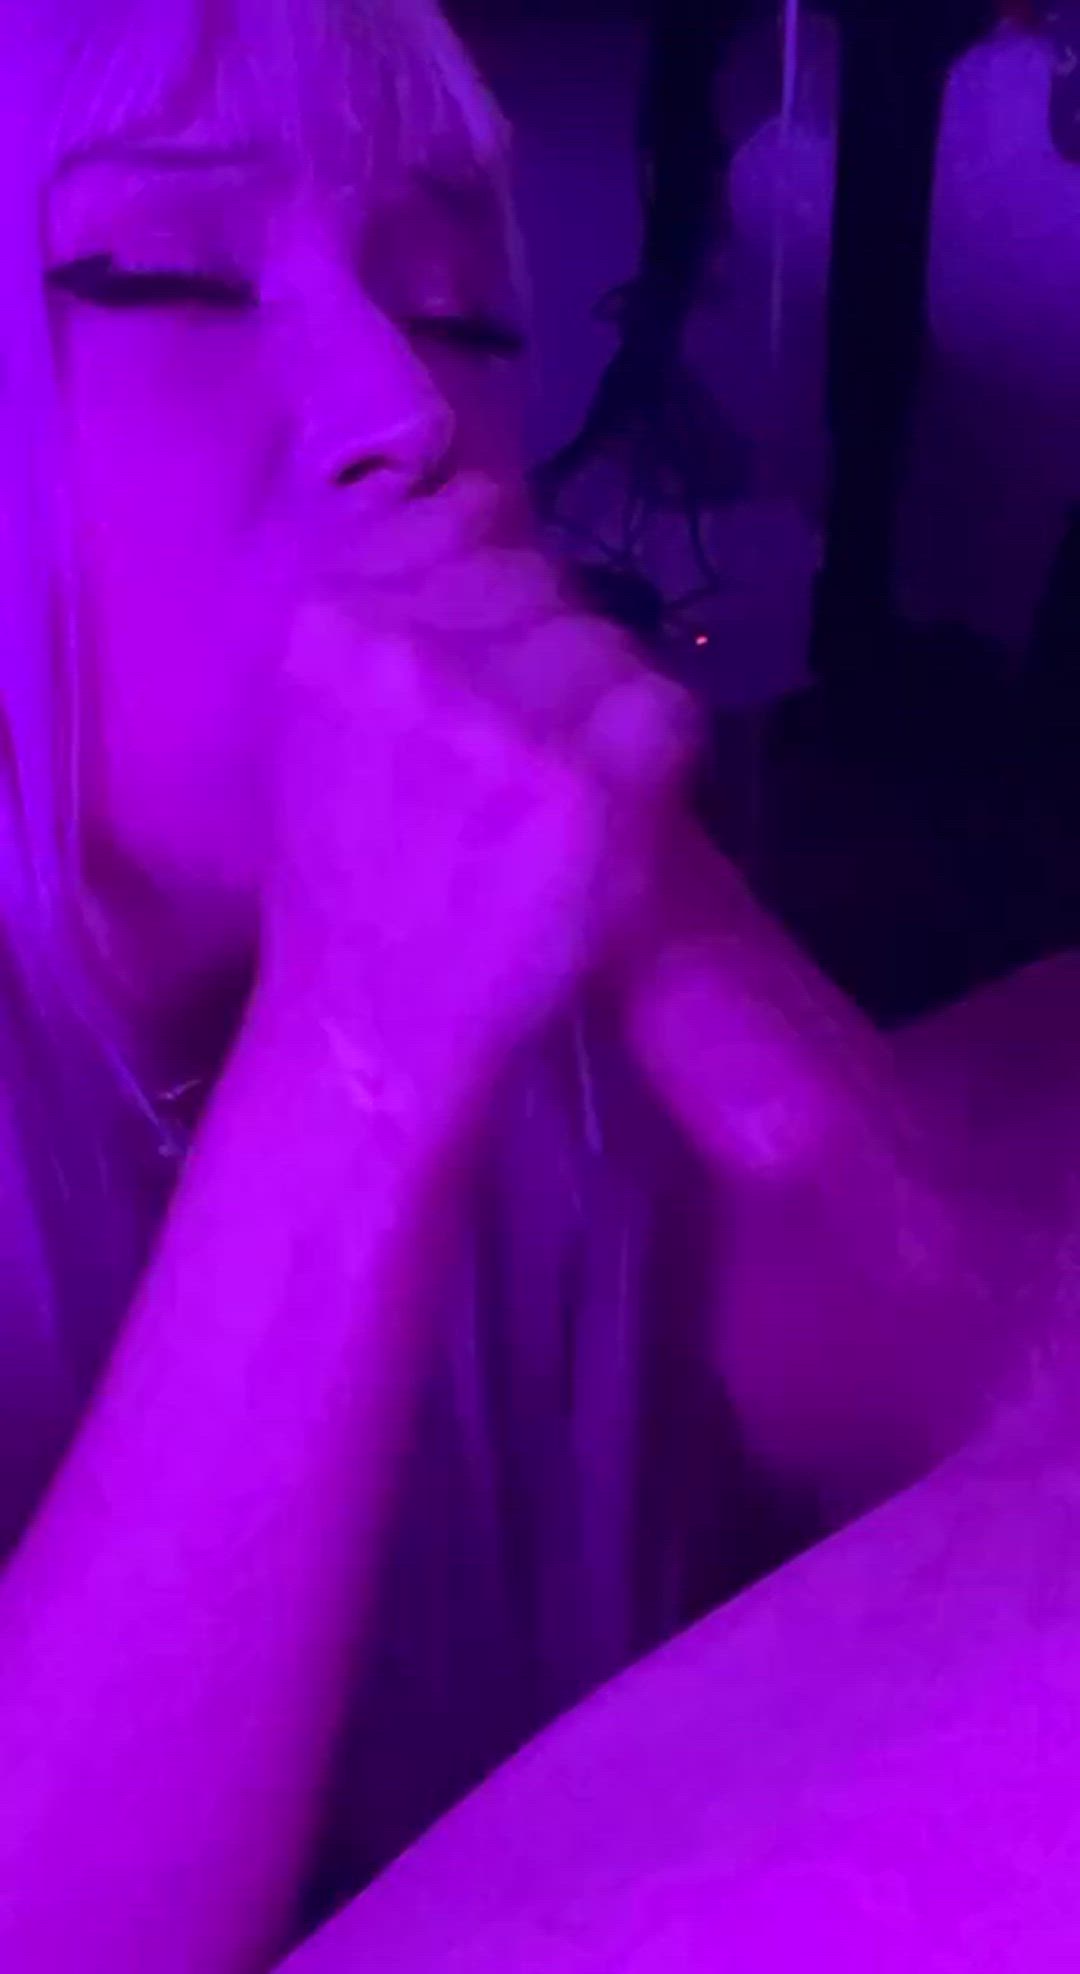 Amateur porn video with onlyfans model sierralovesyoubb <strong>@sierralovesyoubb</strong>